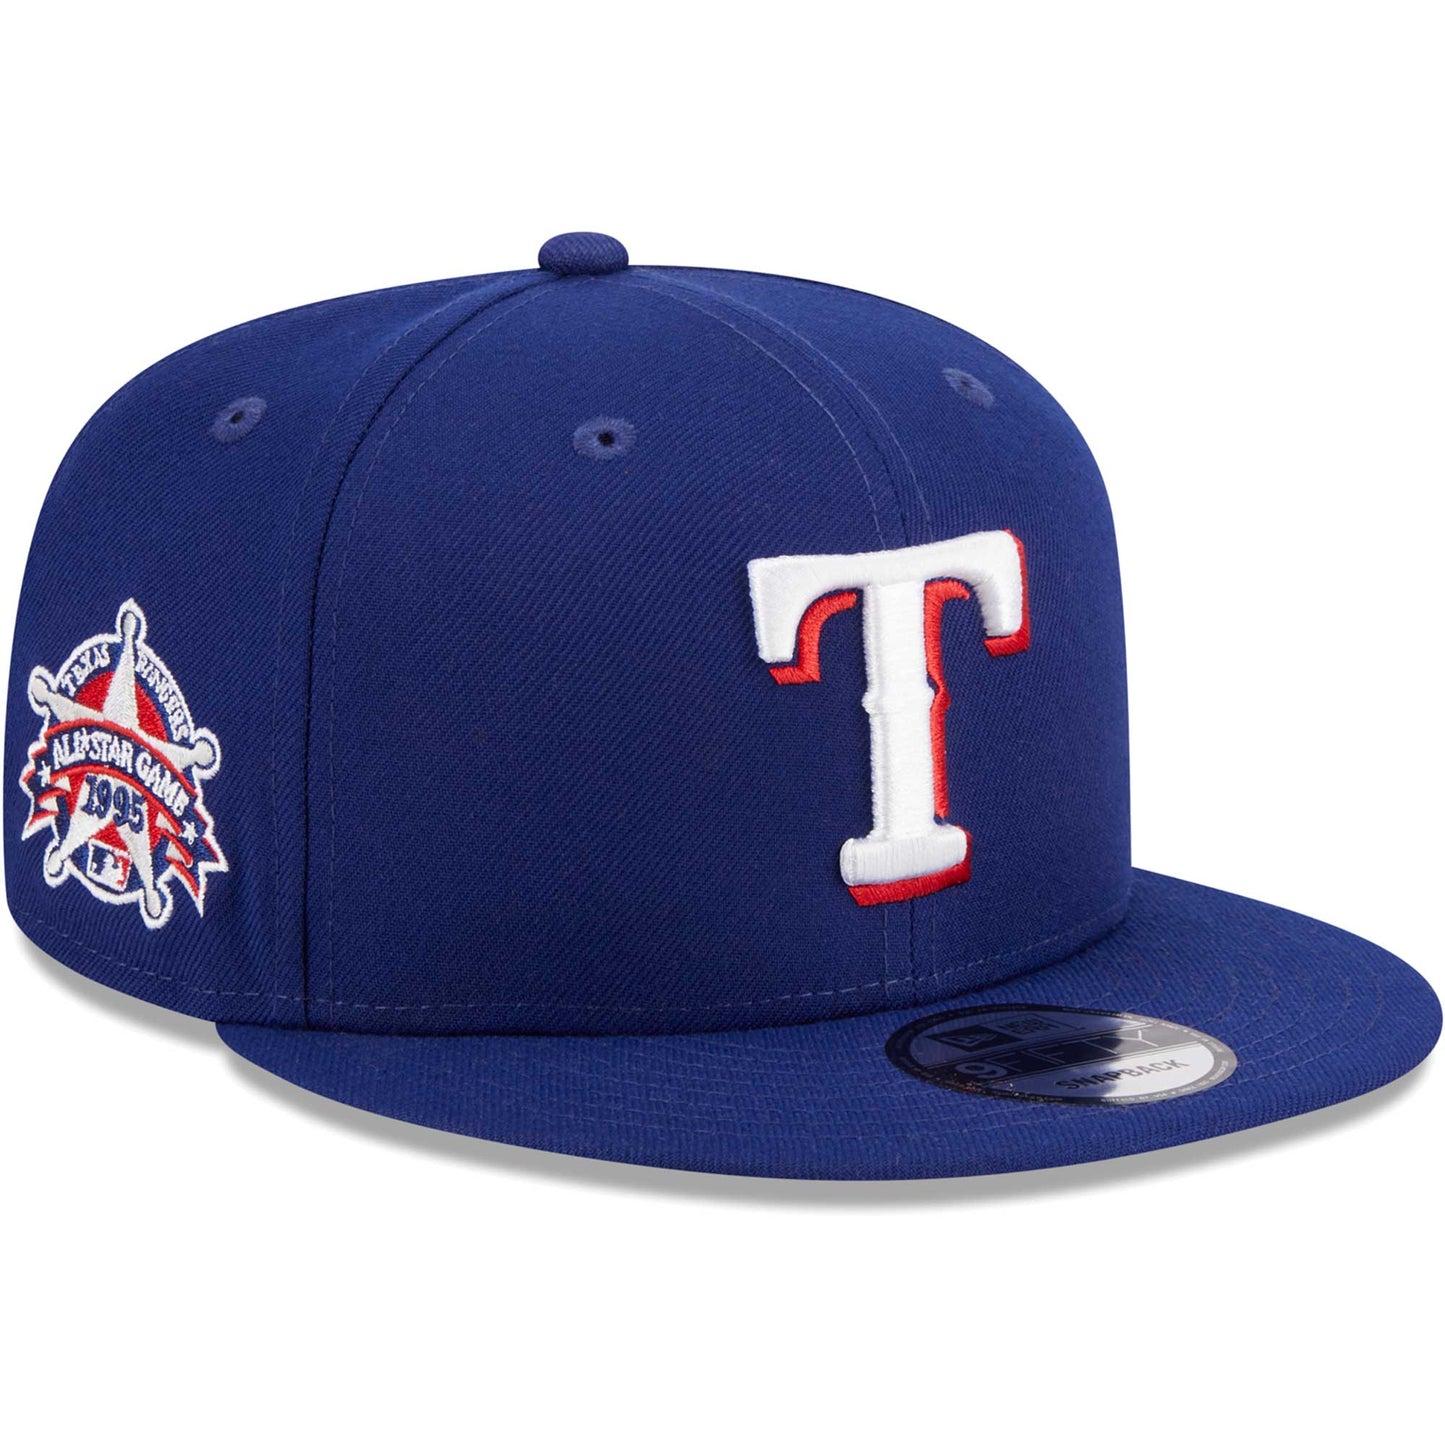 Texas Rangers New Era 1995 MLB All-Star Game Side Patch 9FIFTY Snapback Hat - Royal